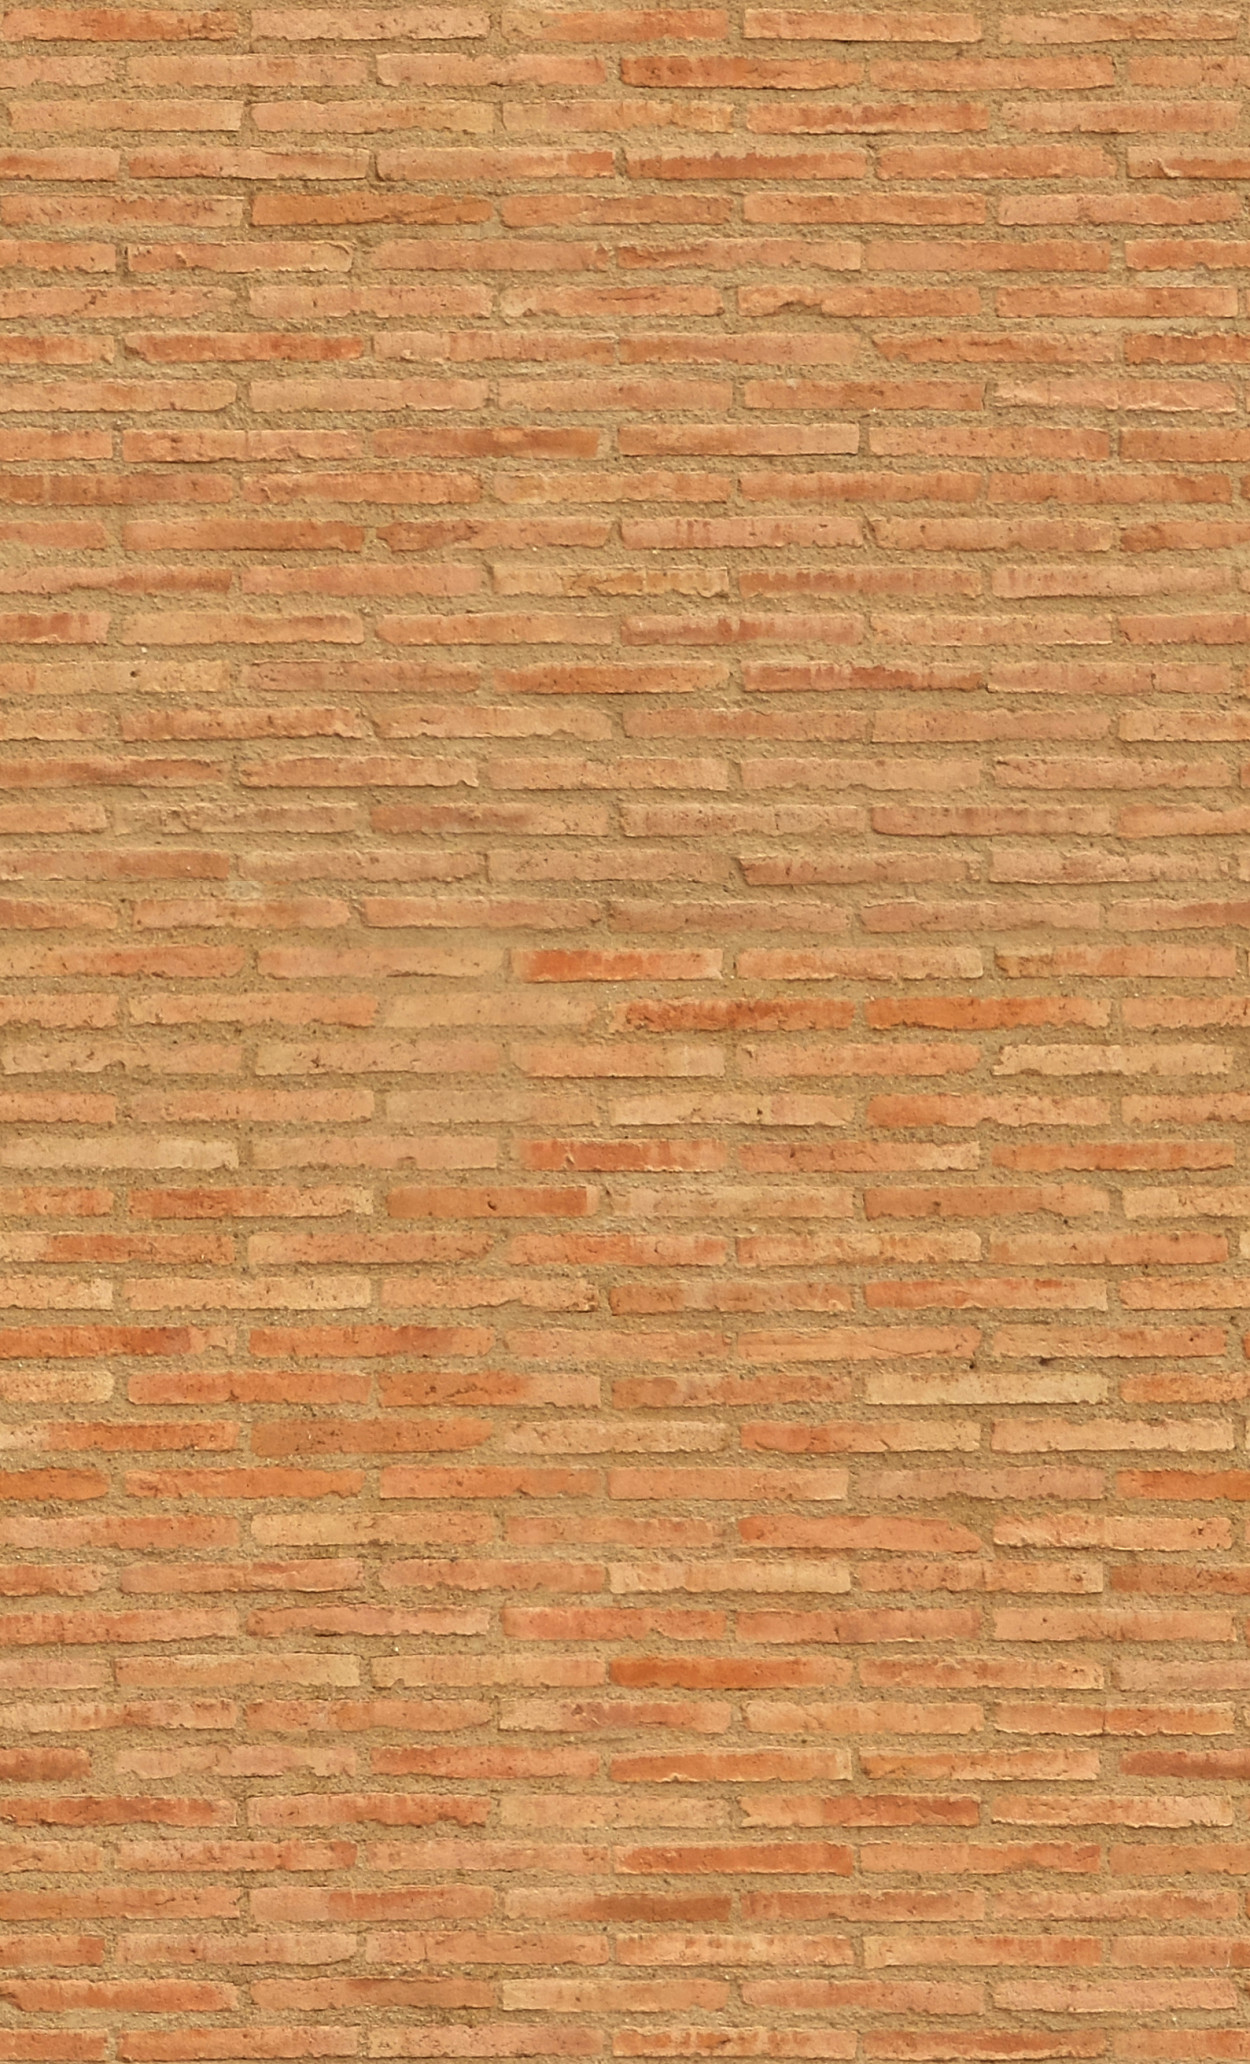 A seamless long bricks (barbastro) texture for use in architectural drawings and 3D models